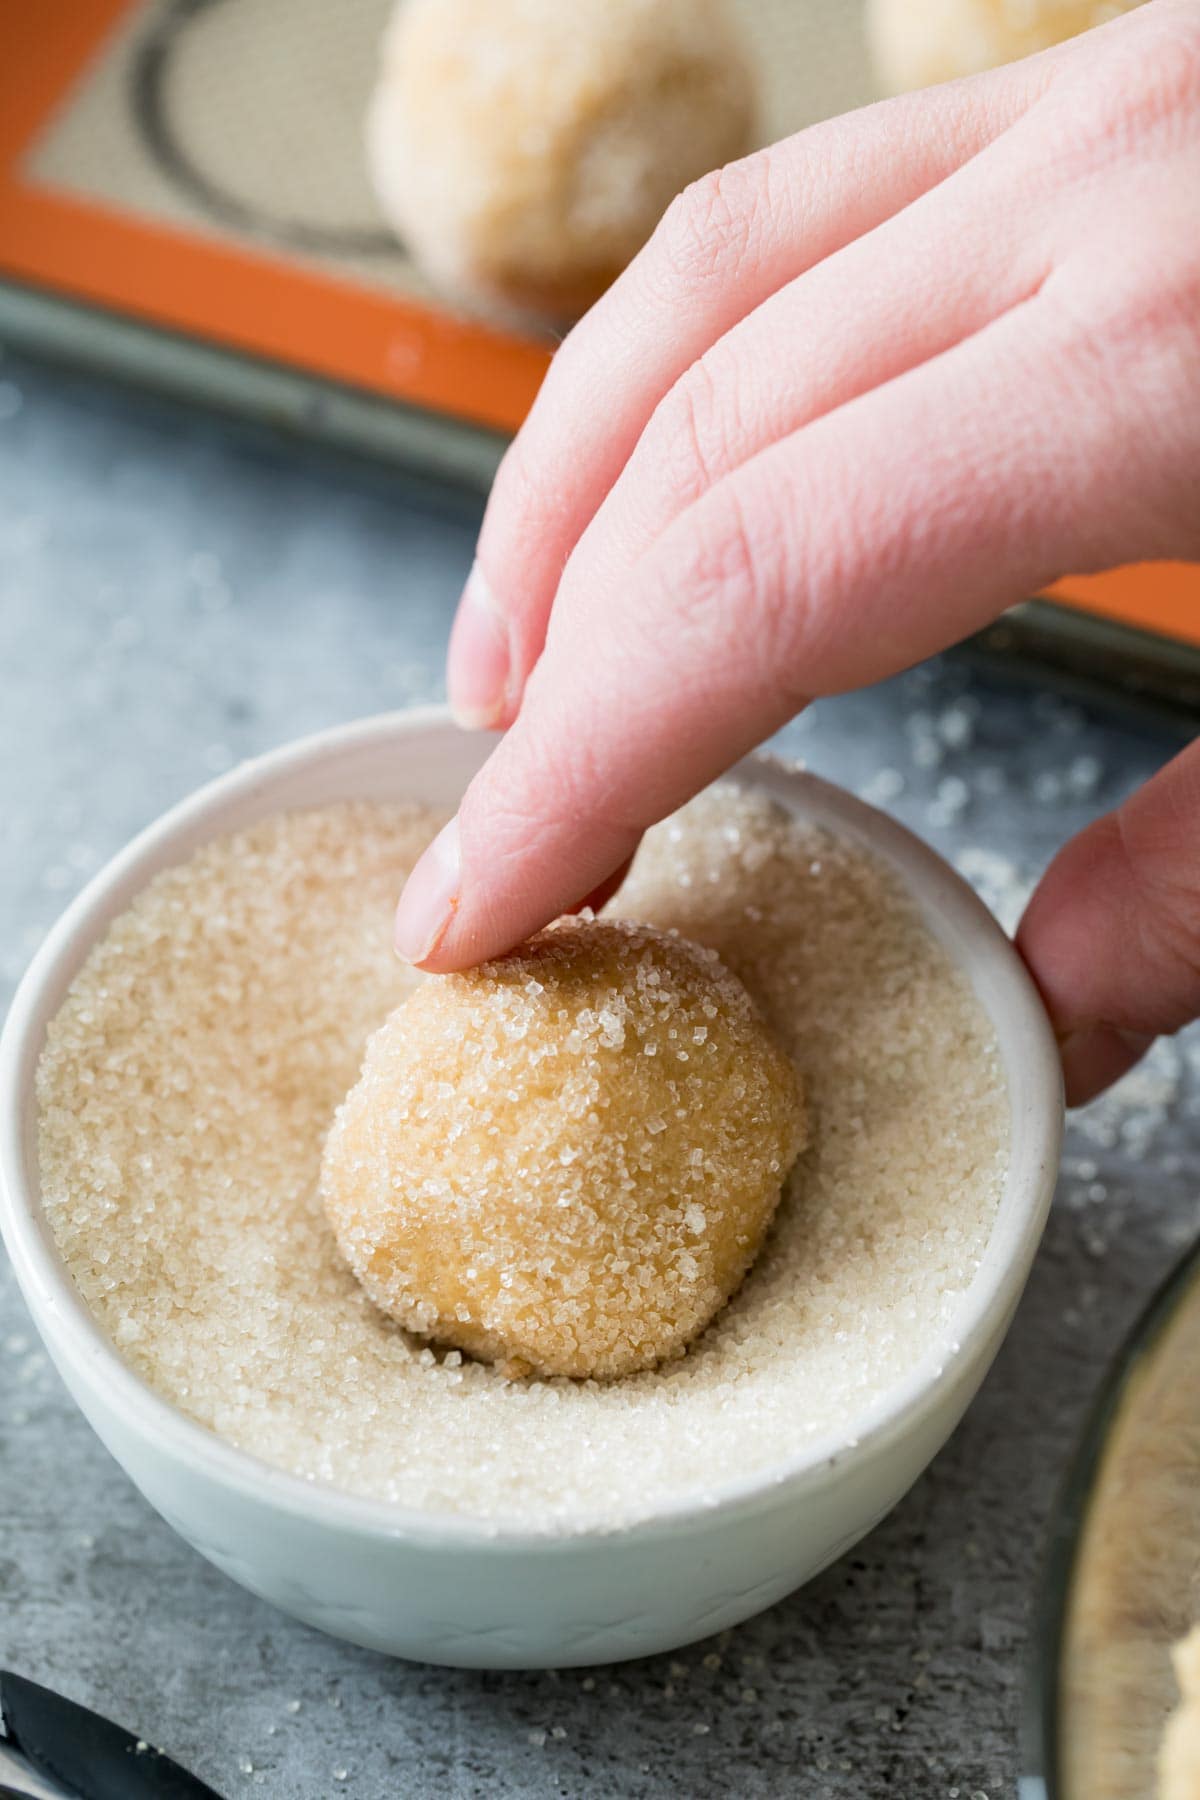 Cookie dough ball being rolled in granulated sugar.